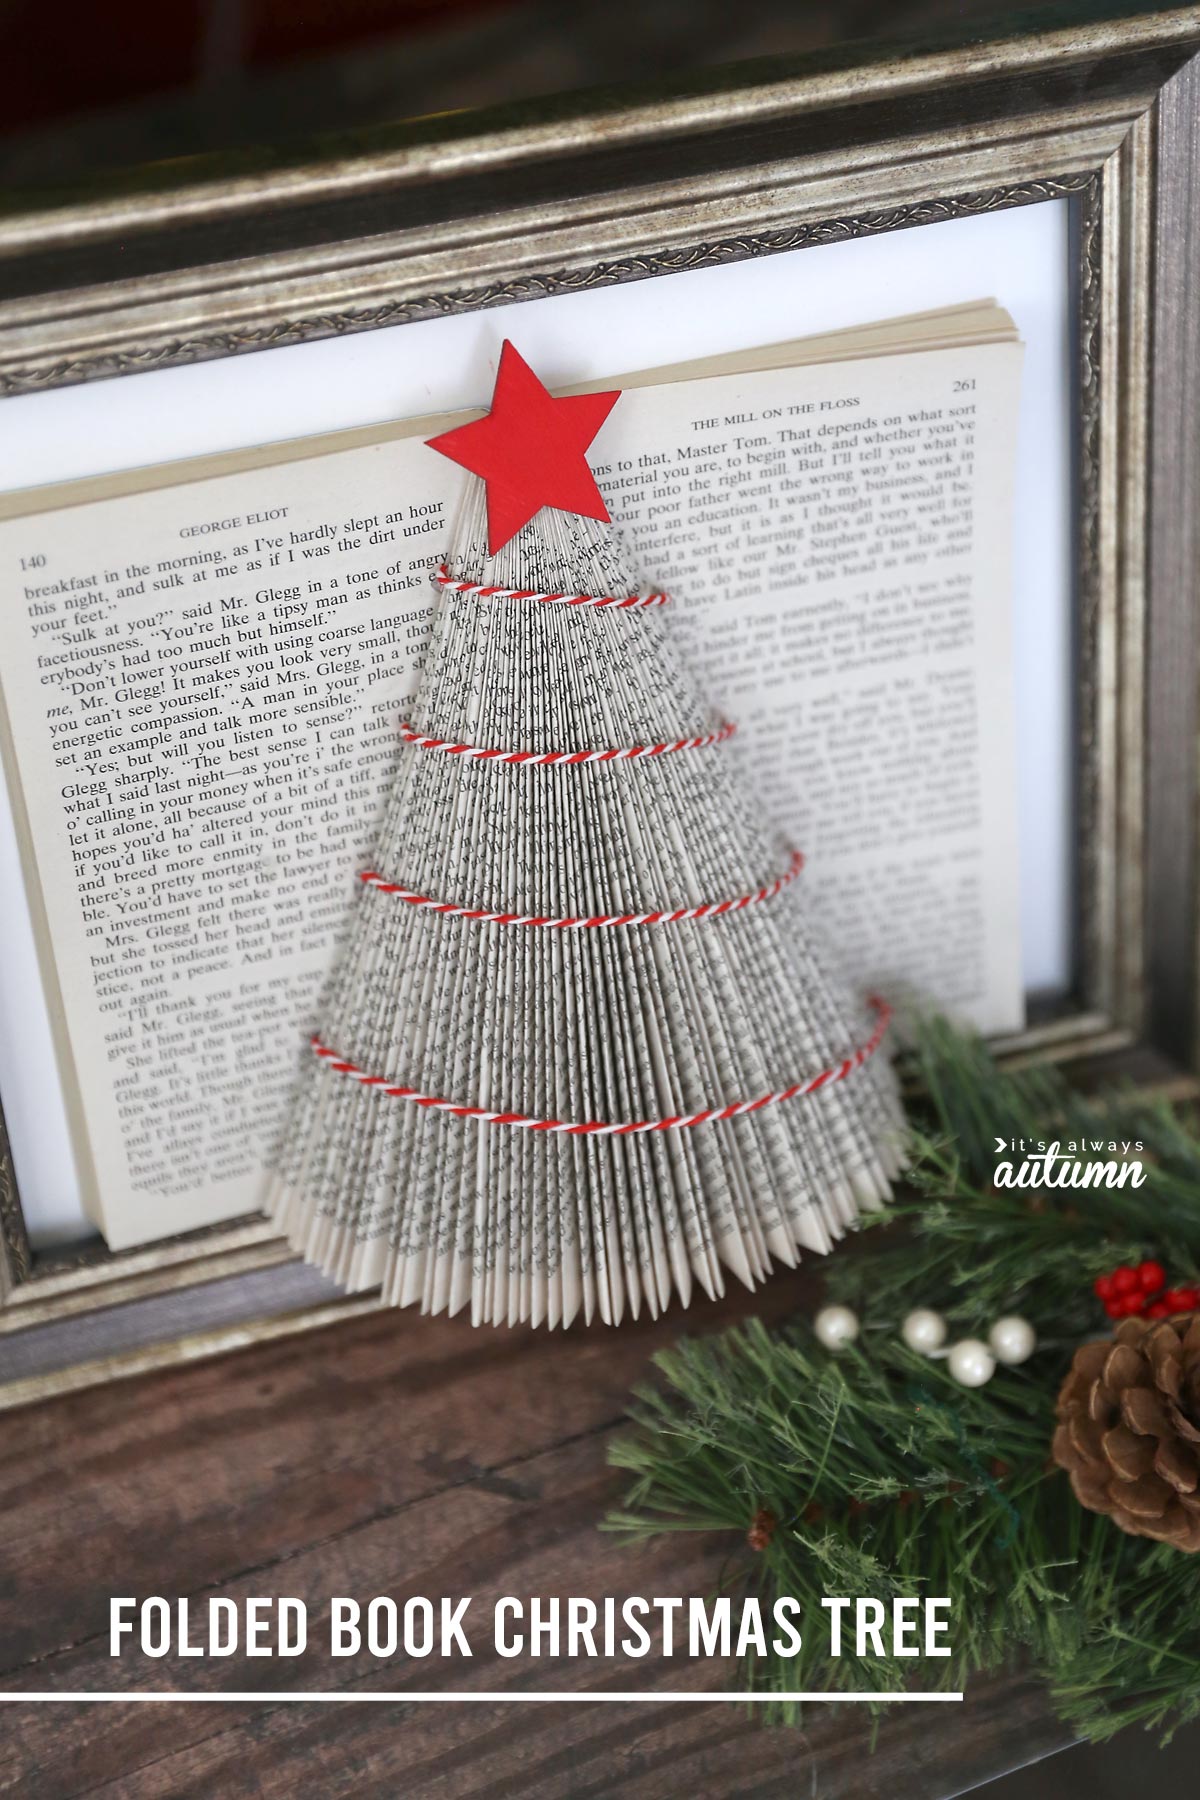 Learn how to make this pretty folded book Christmas tree with an old book from the thrift store. Easy Christmas craft.